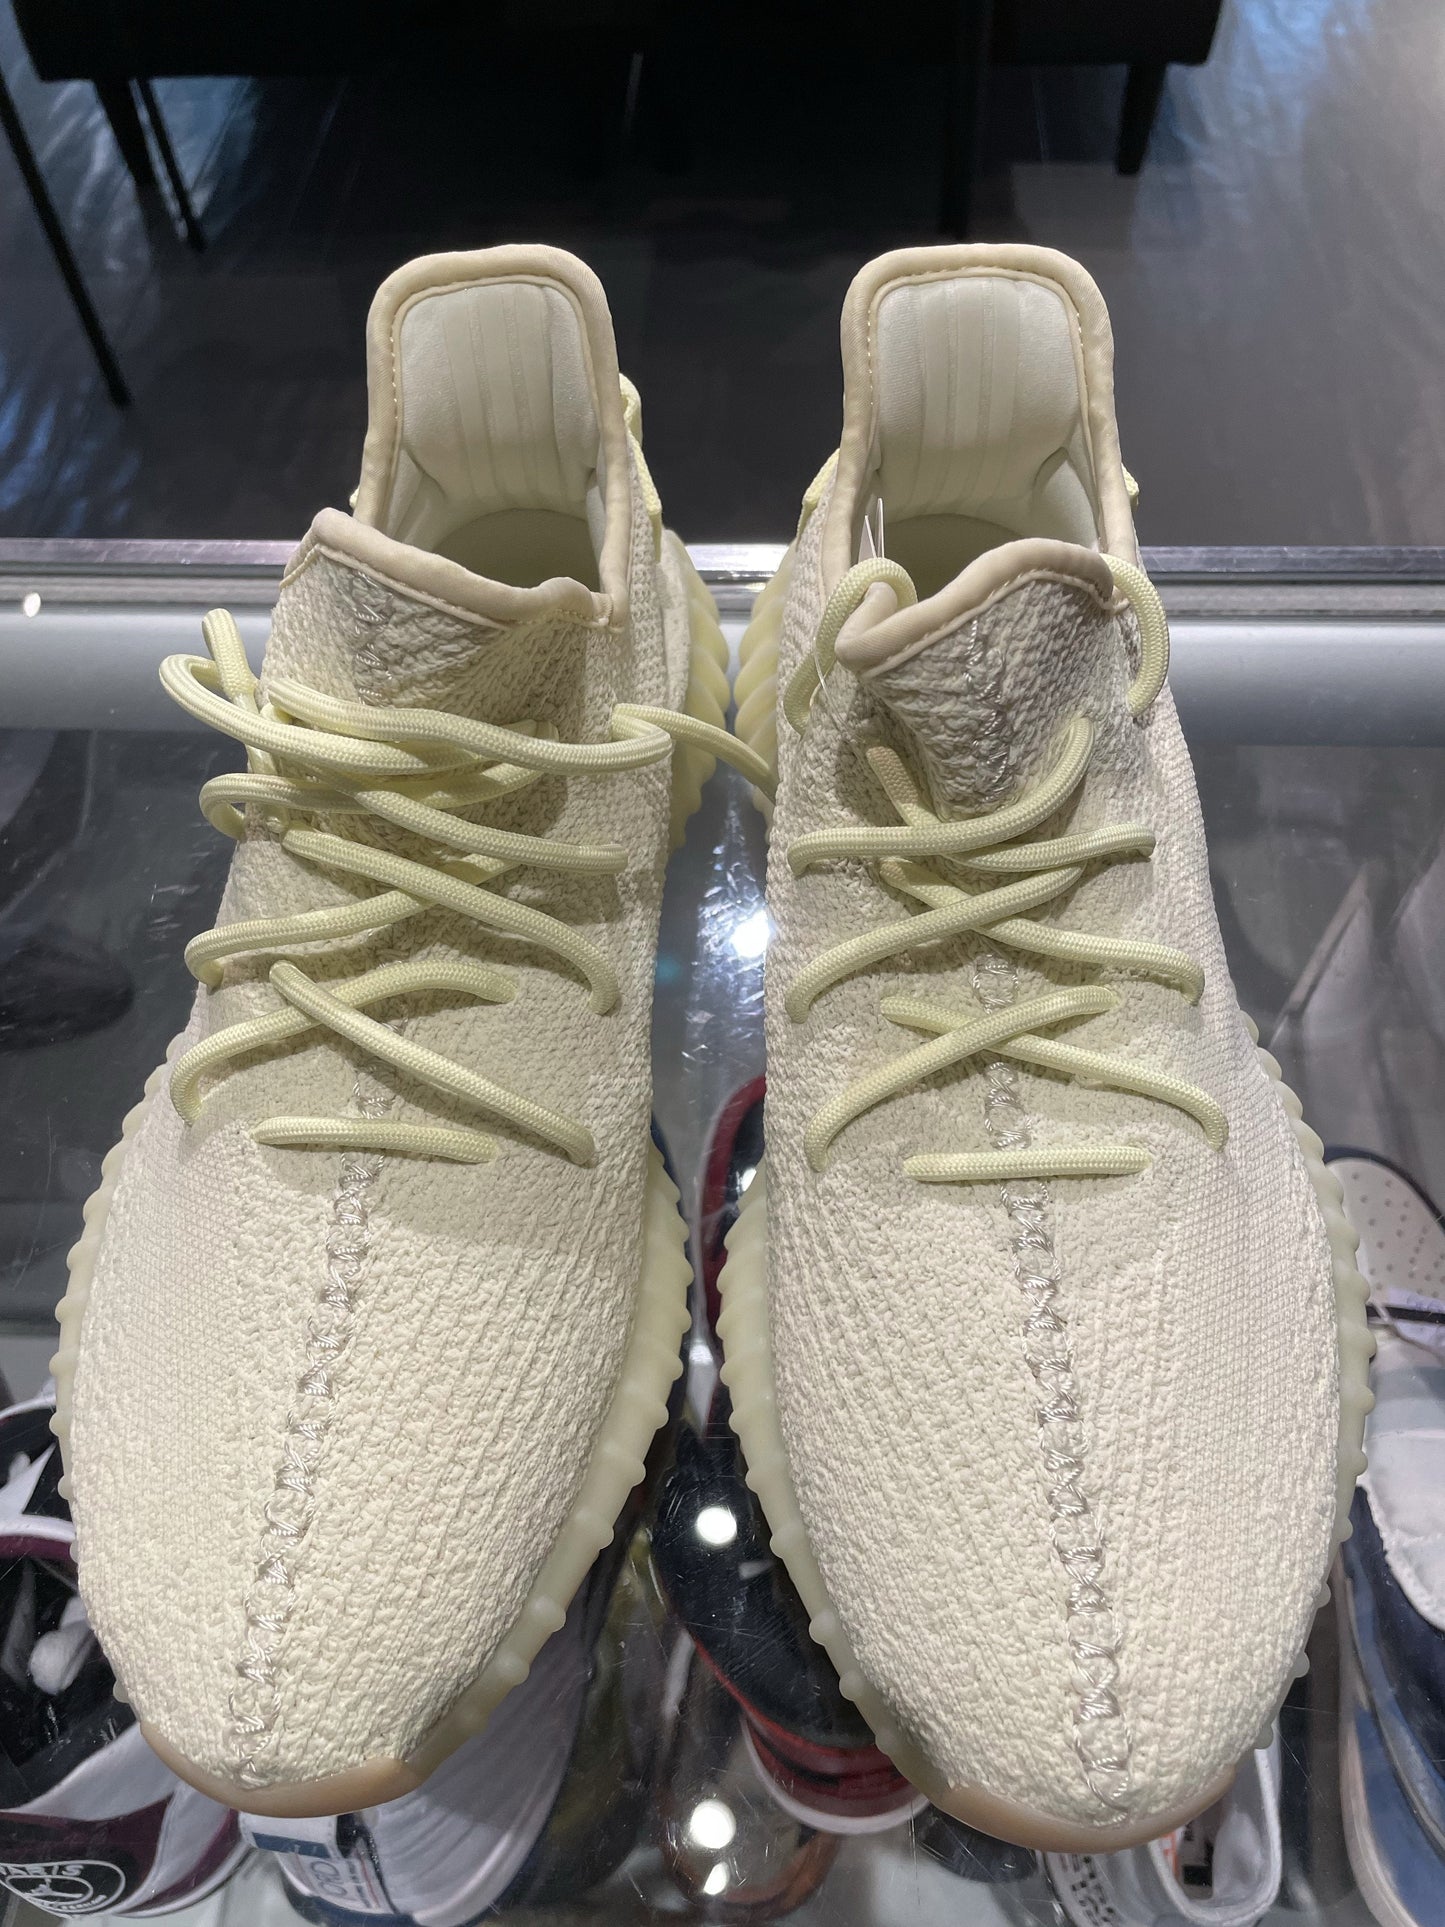 Size 5.5 Adidas Yeezy Boost 350 V2 “Butter” Brand New (Mall)